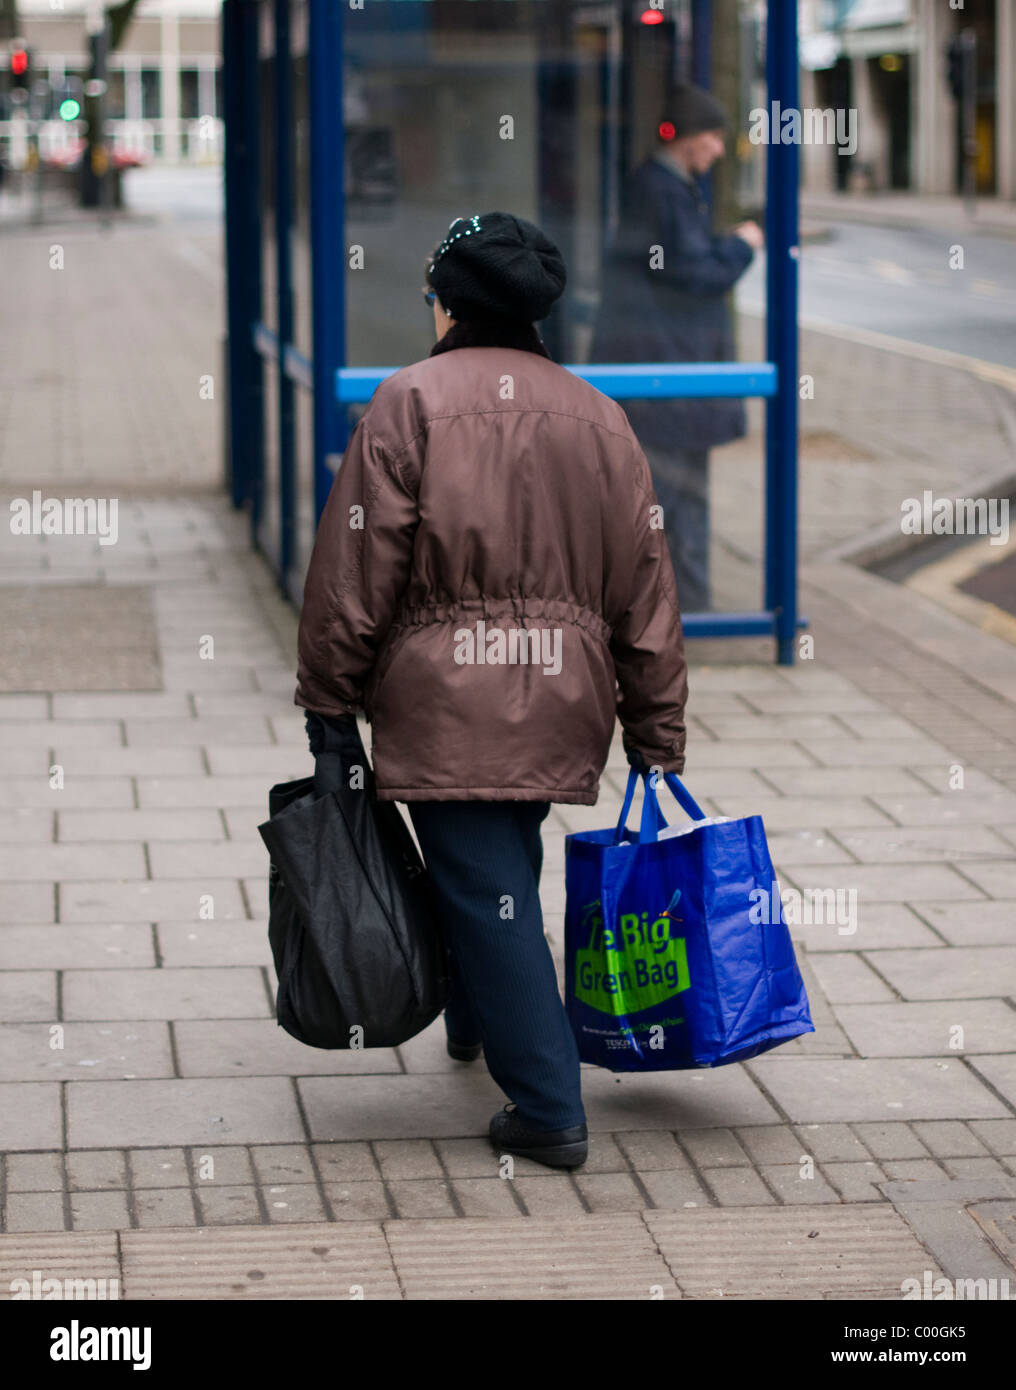 Old lady carrying heavy shopping bags through Coventry city center, UK. Stock Photo